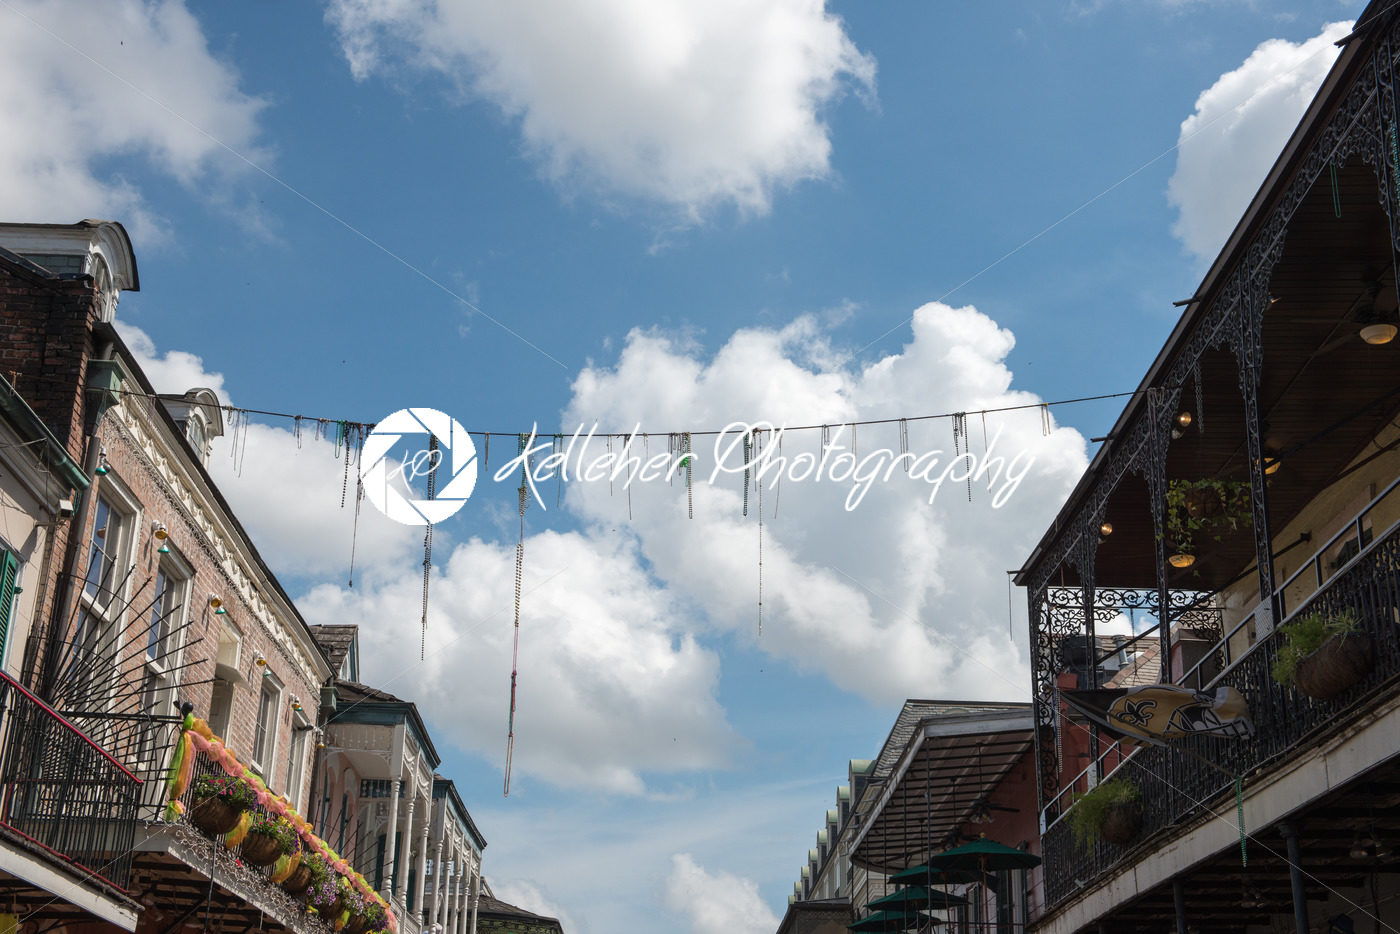 NEW ORLEANS, LA – APRIL 13: Street in the French Quarter of New Orleans, Louisiana showing historic buldings with unique architecture on April 13, 2014 - Kelleher Photography Store